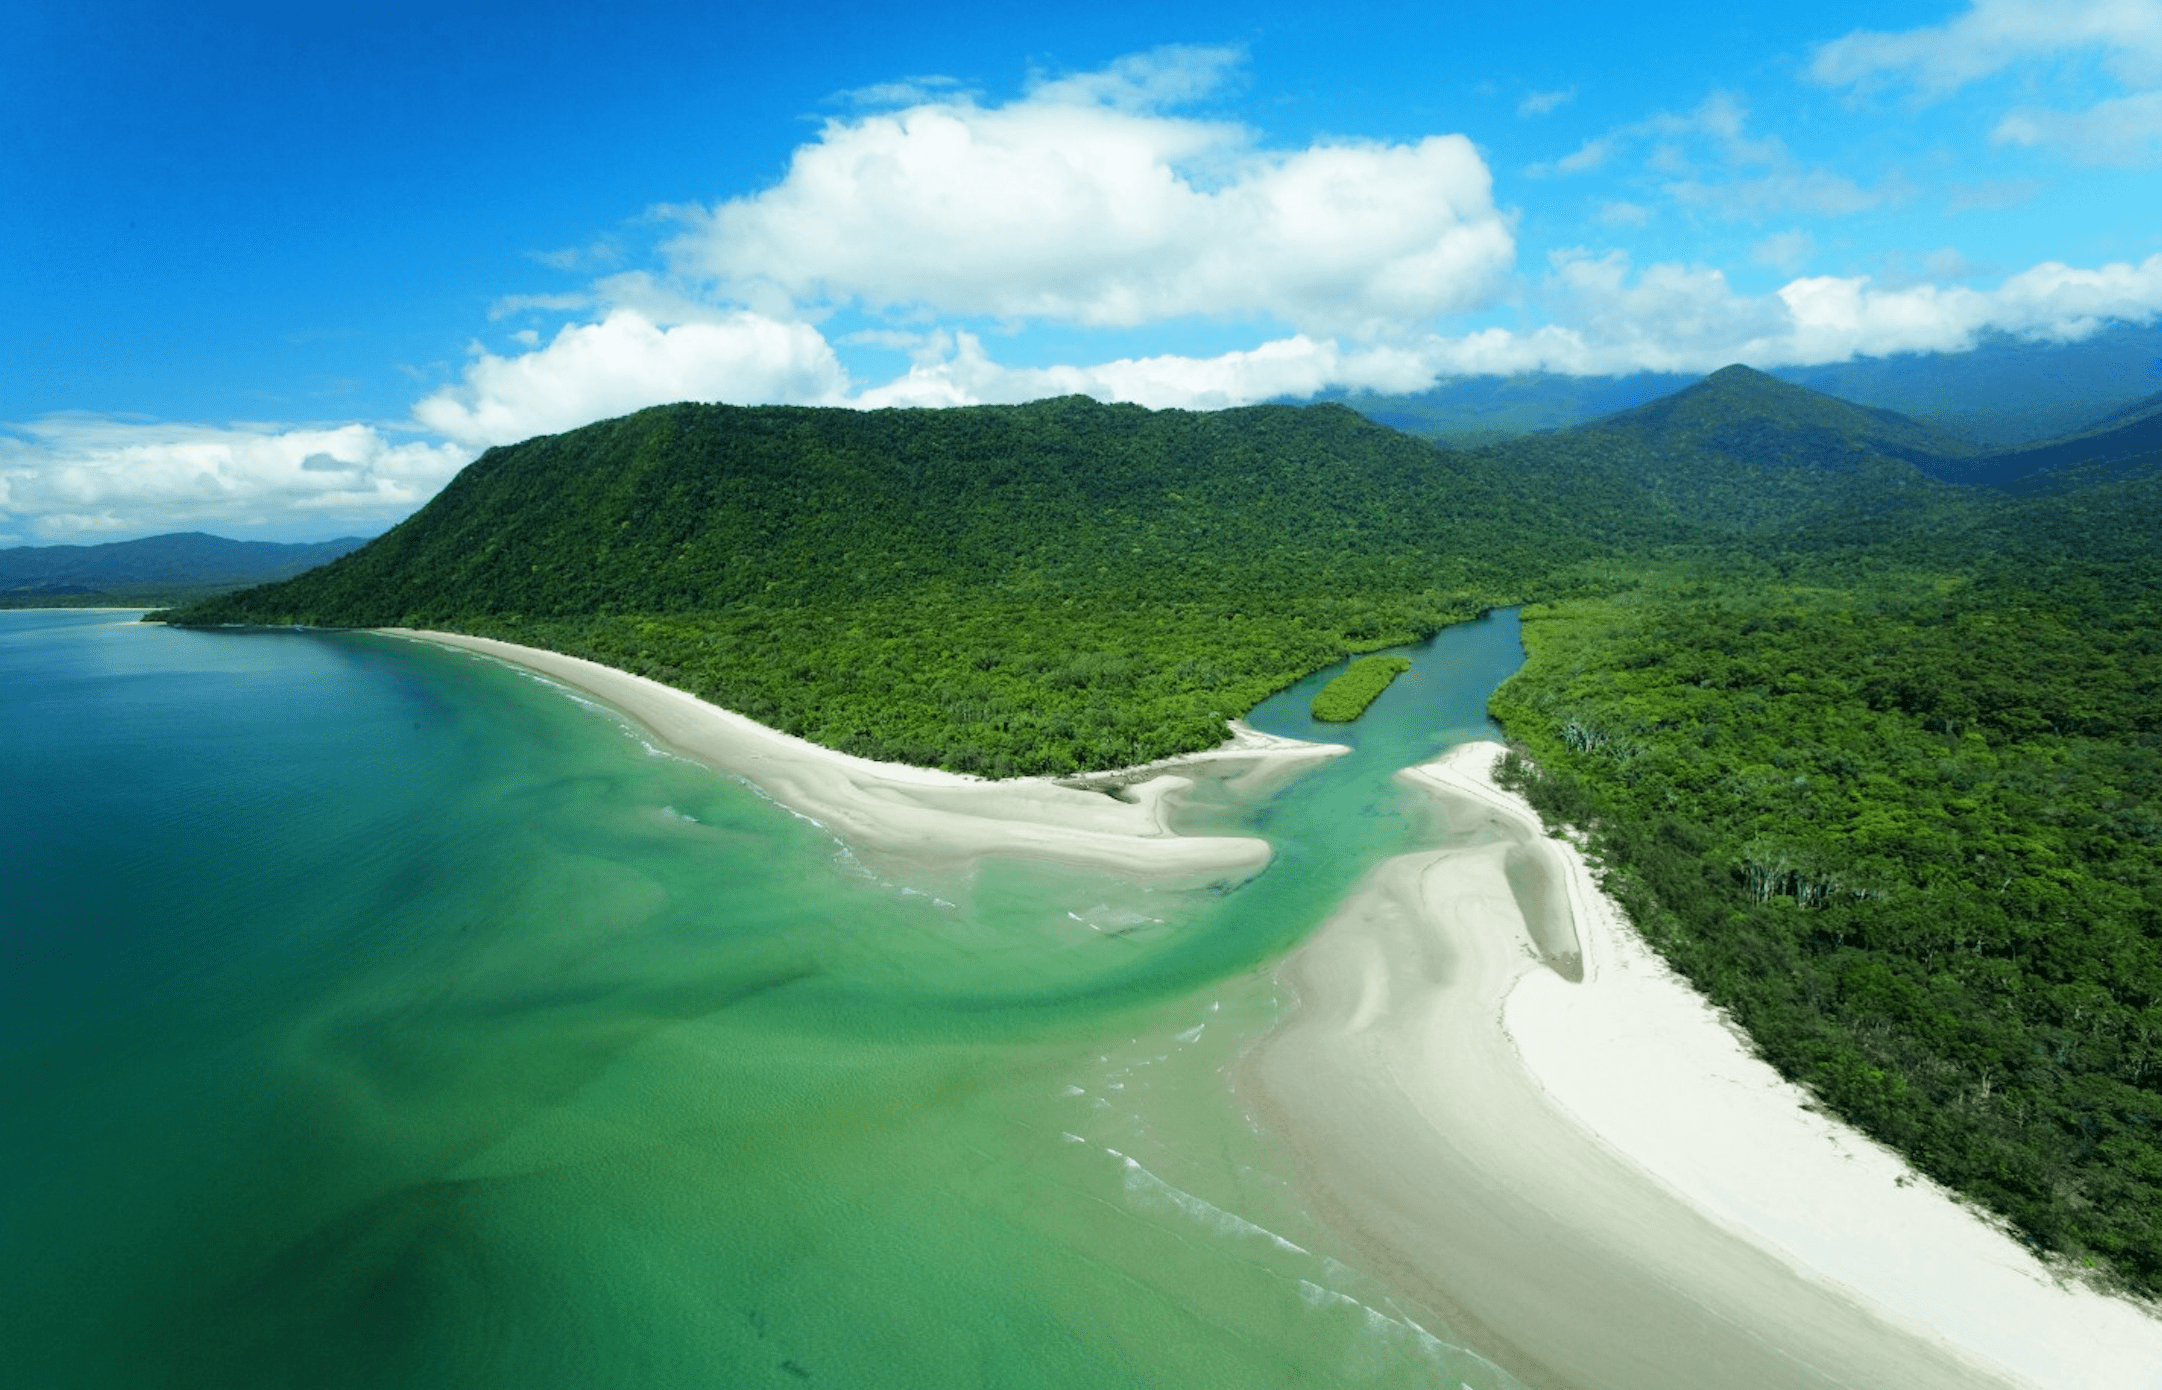 Our free-camping guide for Daintree National Park (CYPAL)